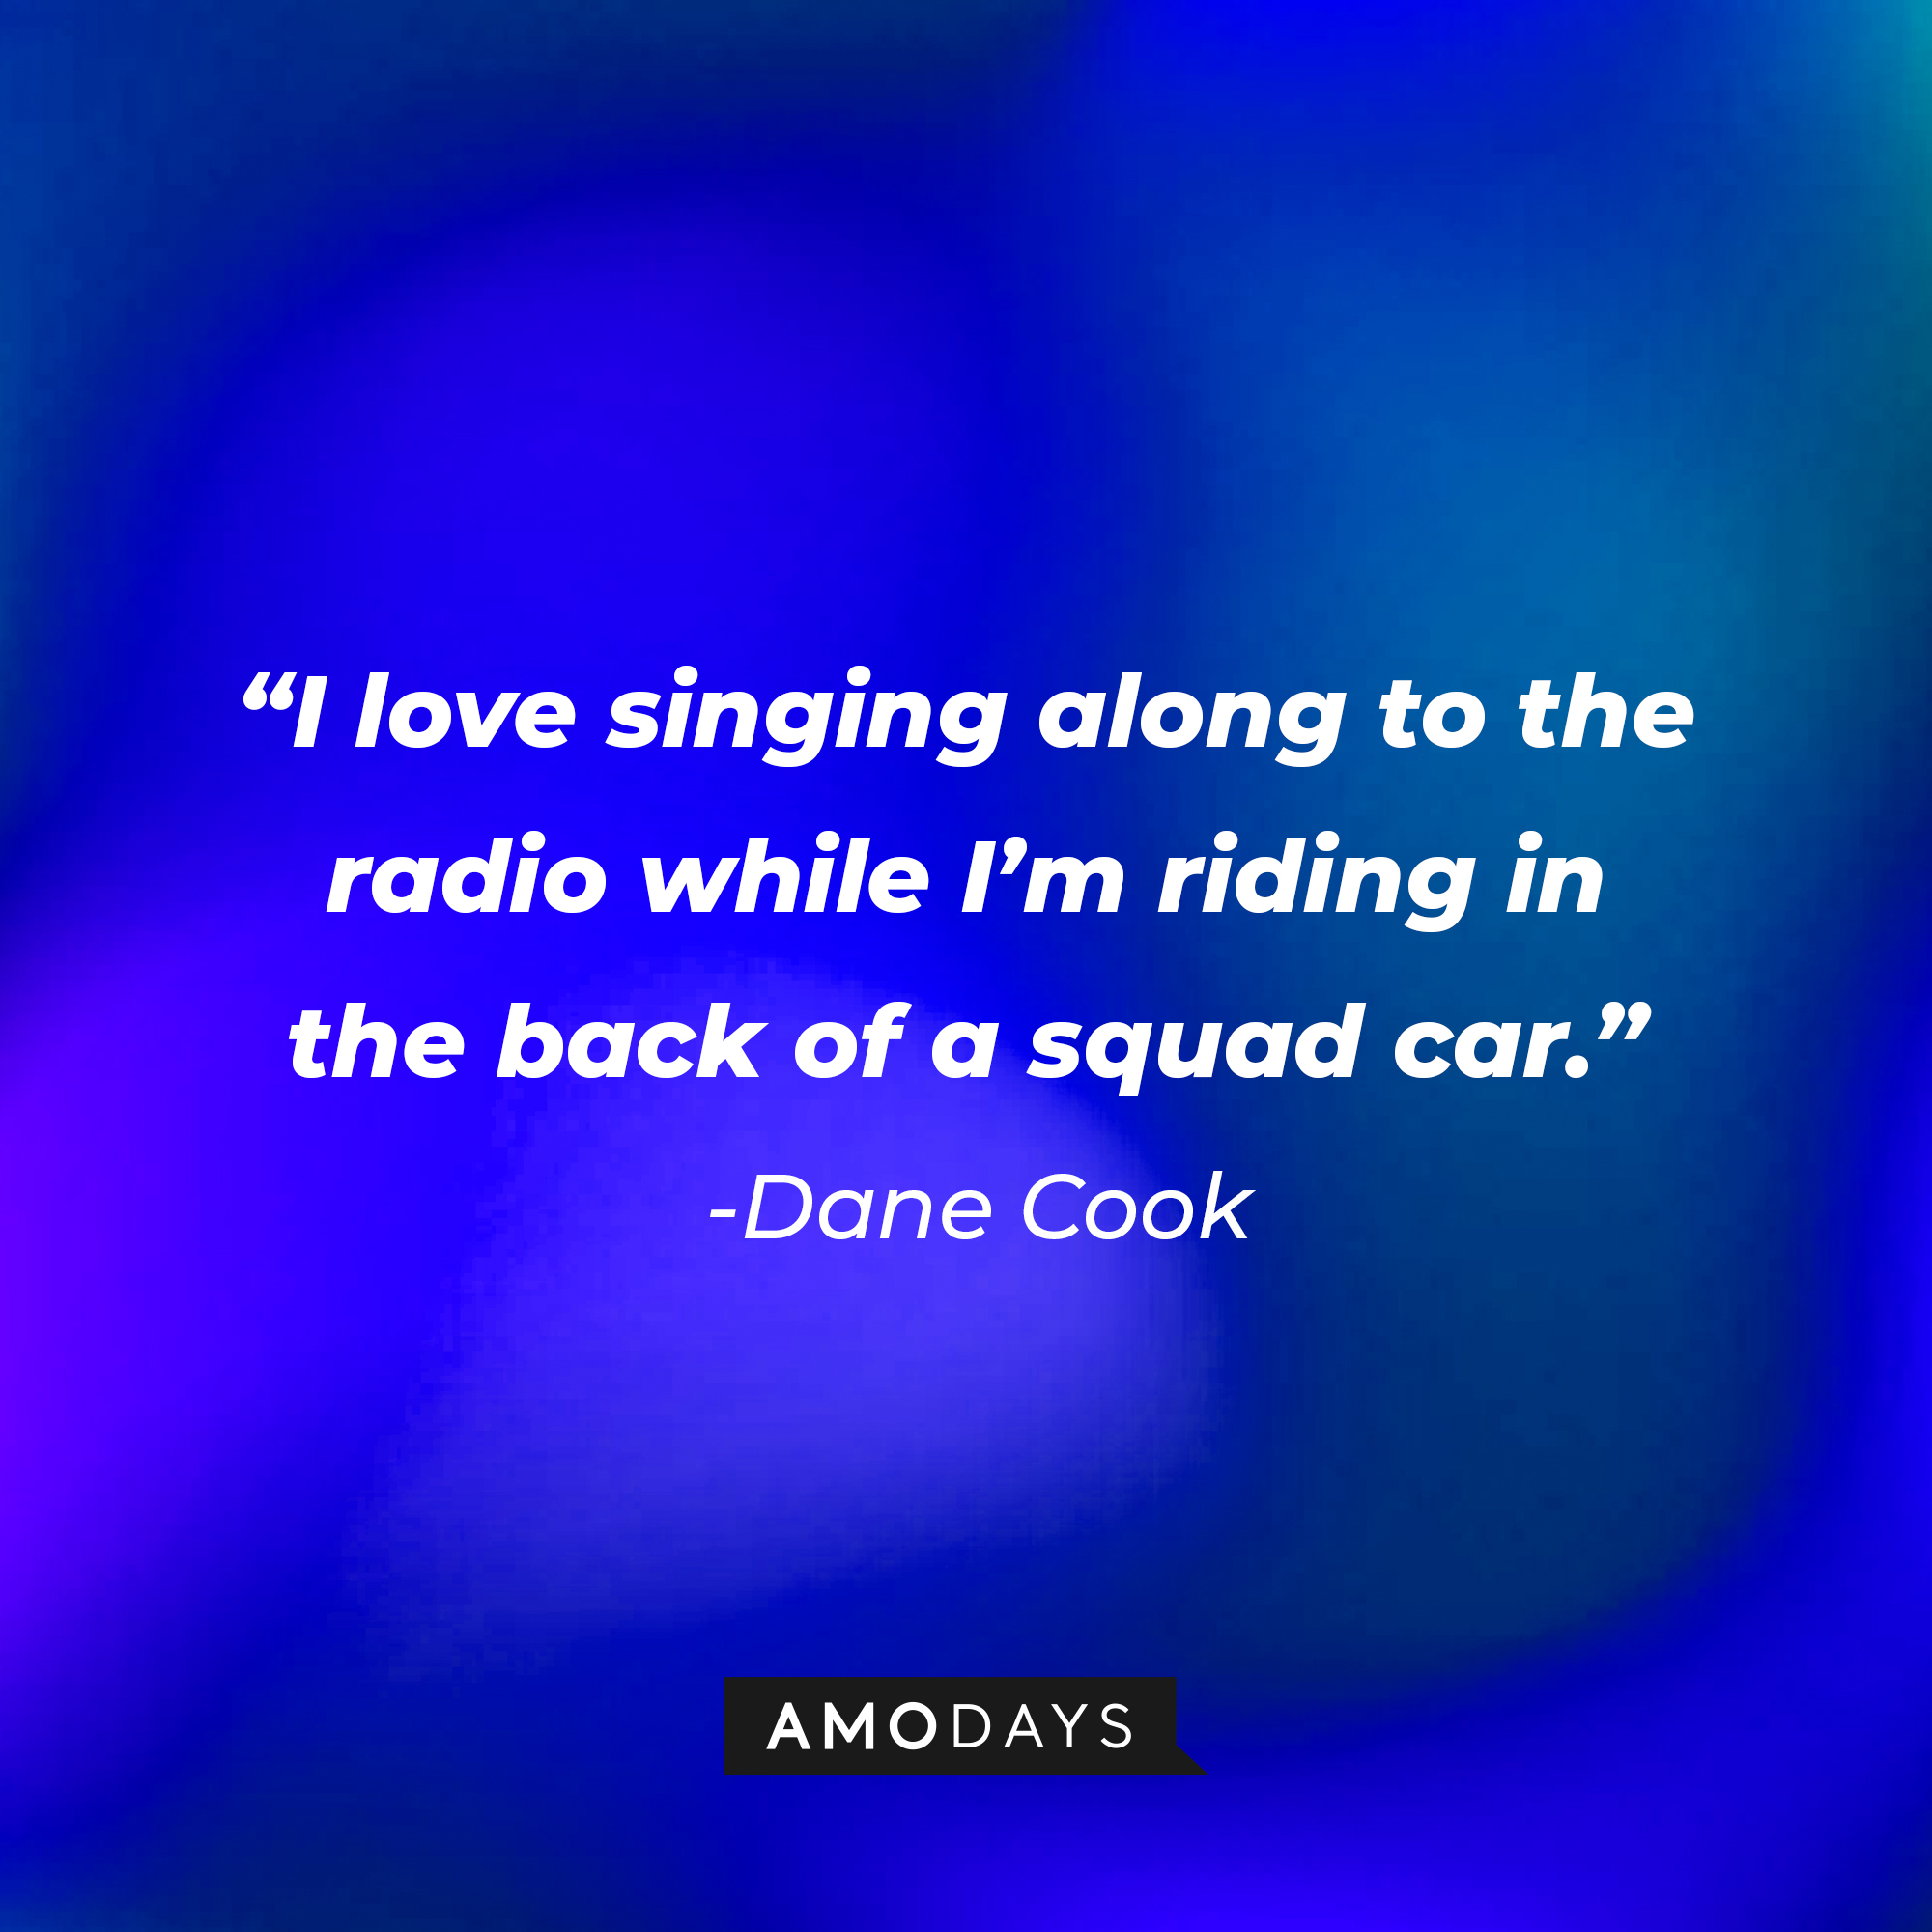 Dane Cook's quote: “I love singing along to the radio while I’m riding in the back of a squad car.” | Source: Amodays